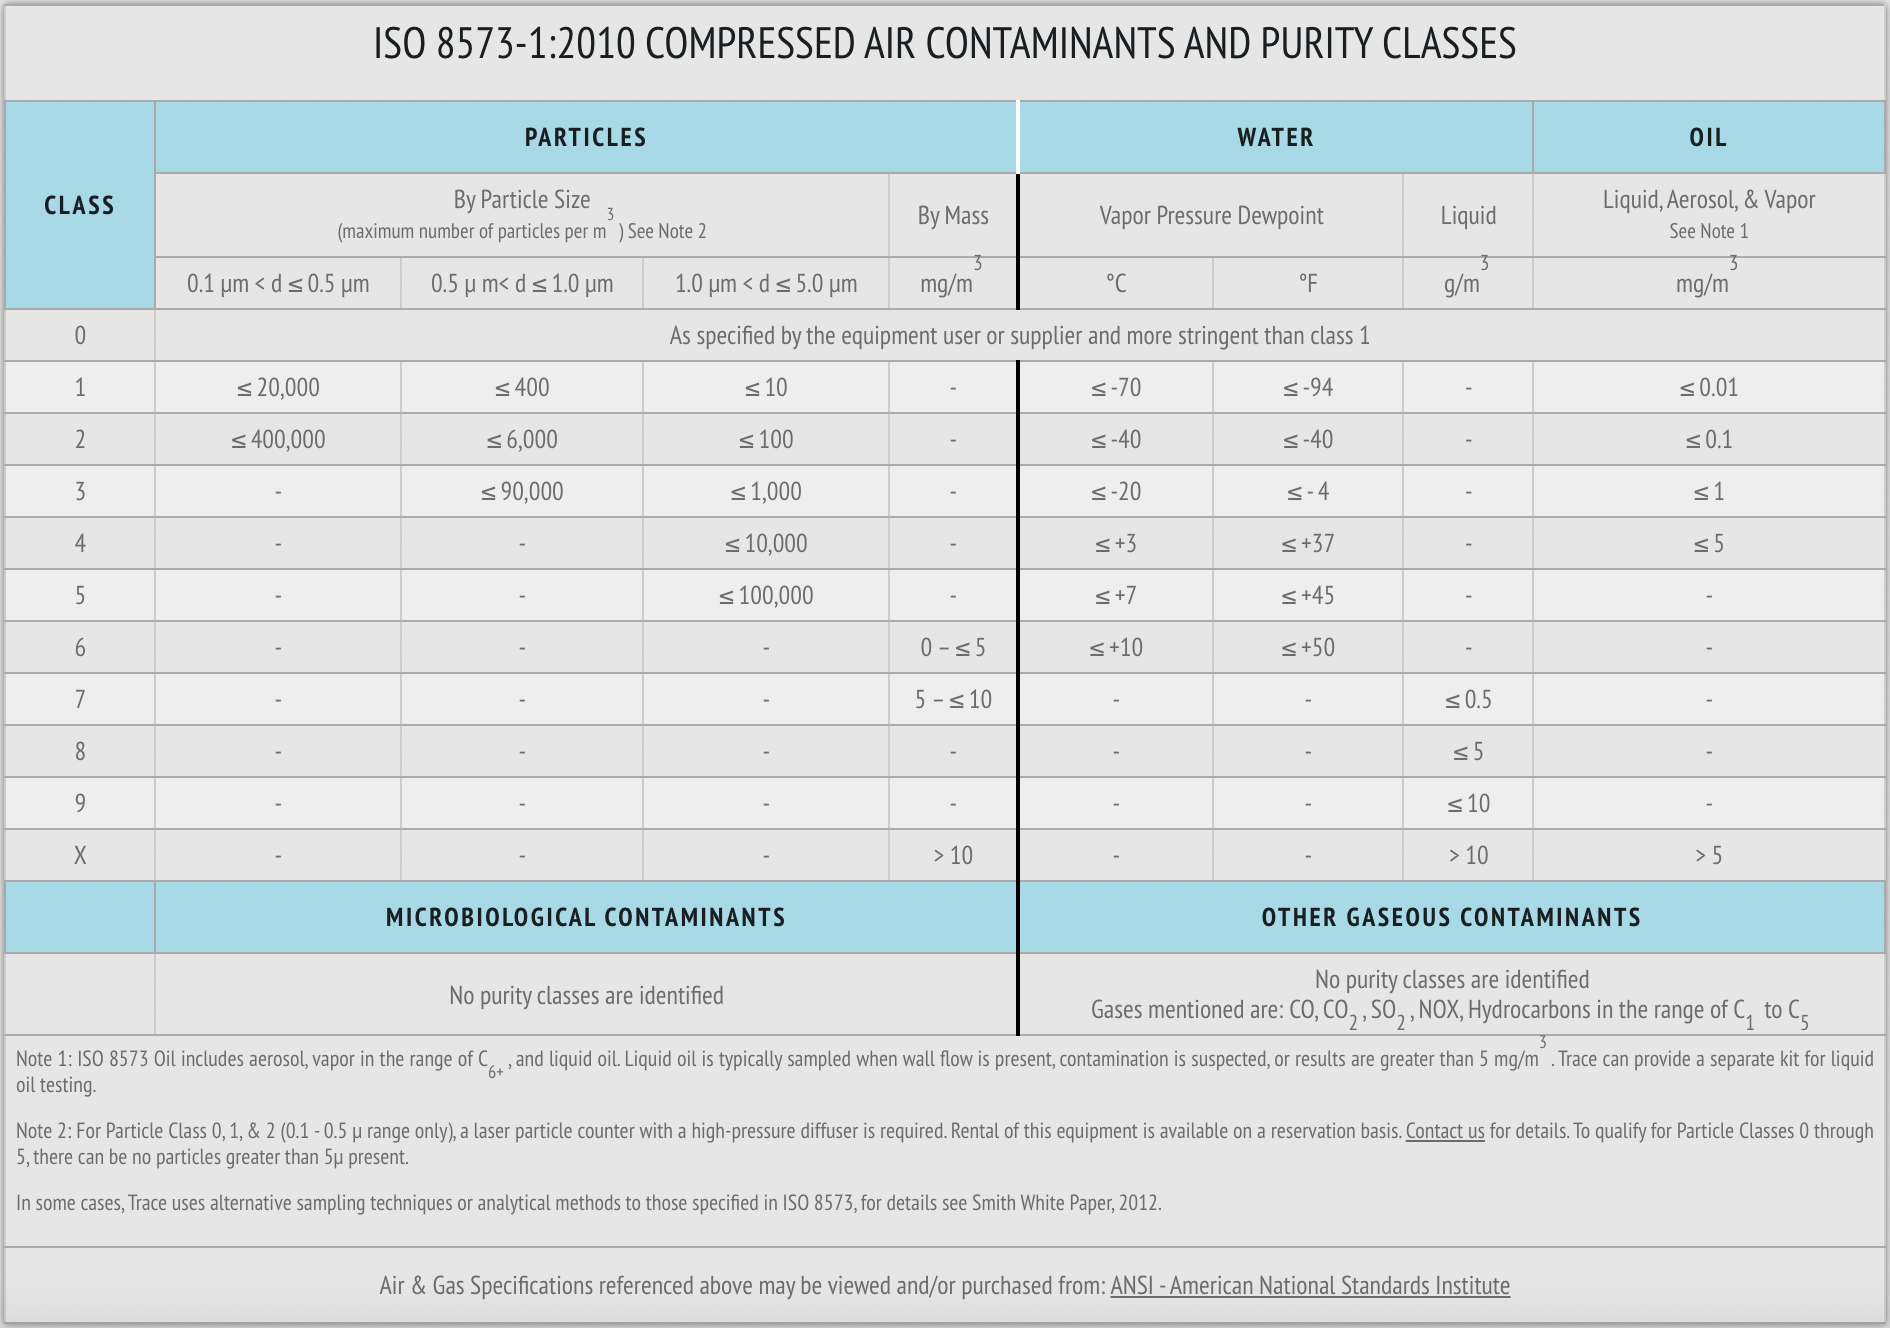 ISO 8573 Compressed air contaminants and purity classes